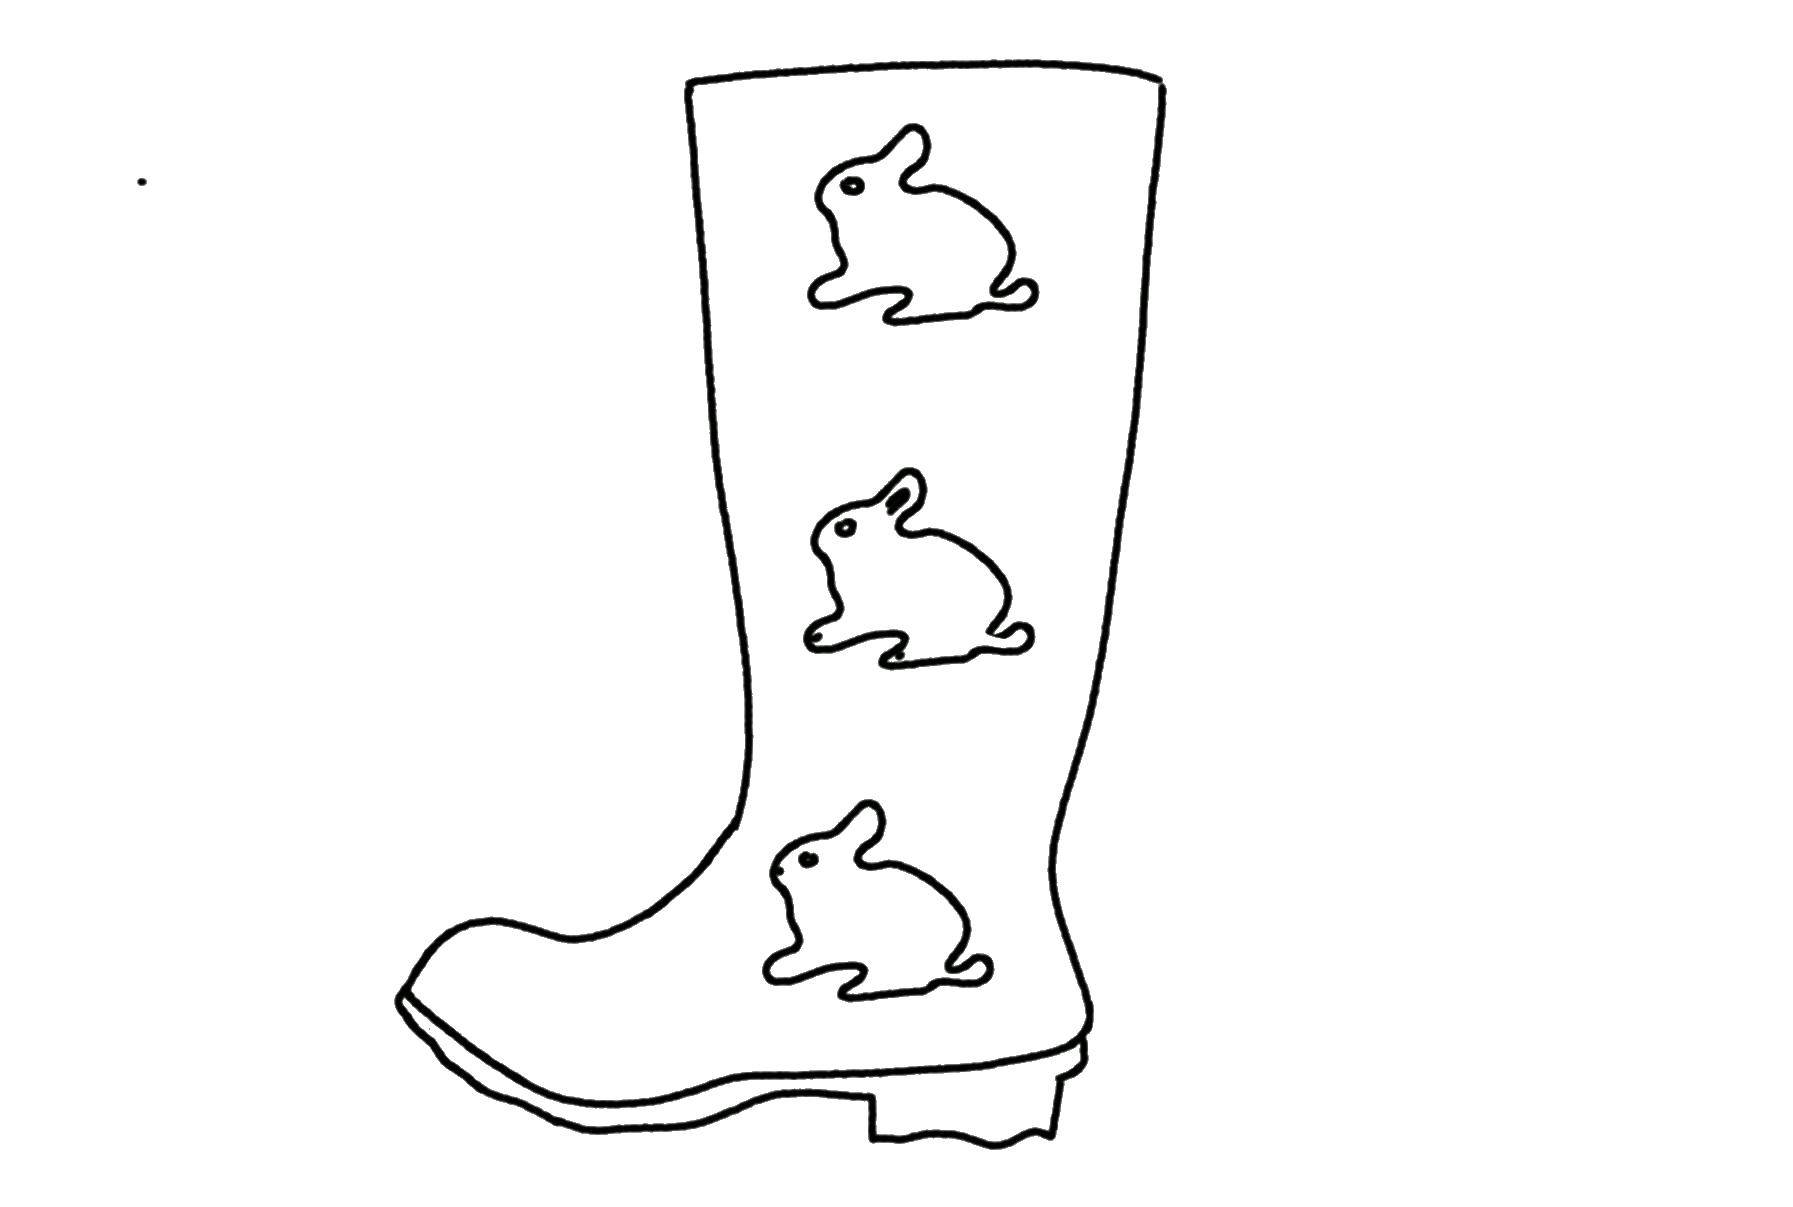 Coloring Boots with bunnies. Category shoes. Tags:  shoes, boots, bunnies.